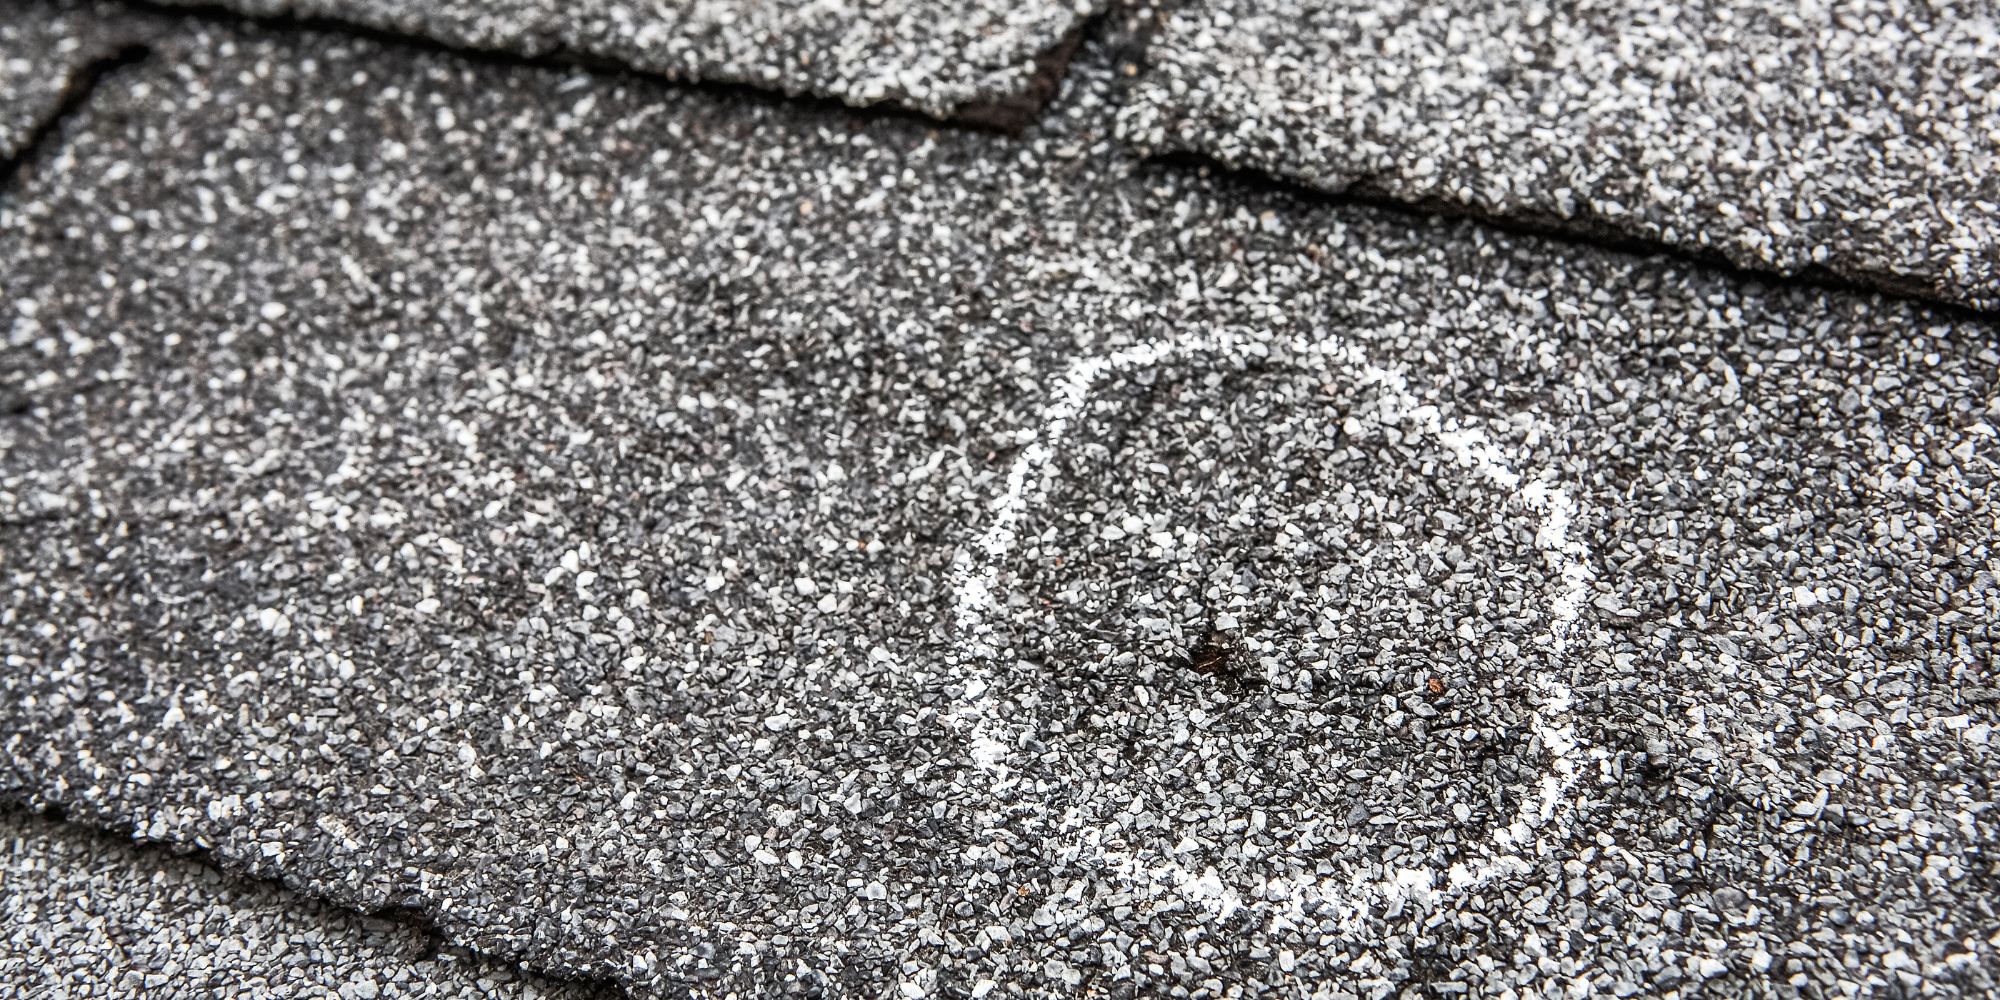 How To Inspect Your Home or Business for Hail Damage This Season